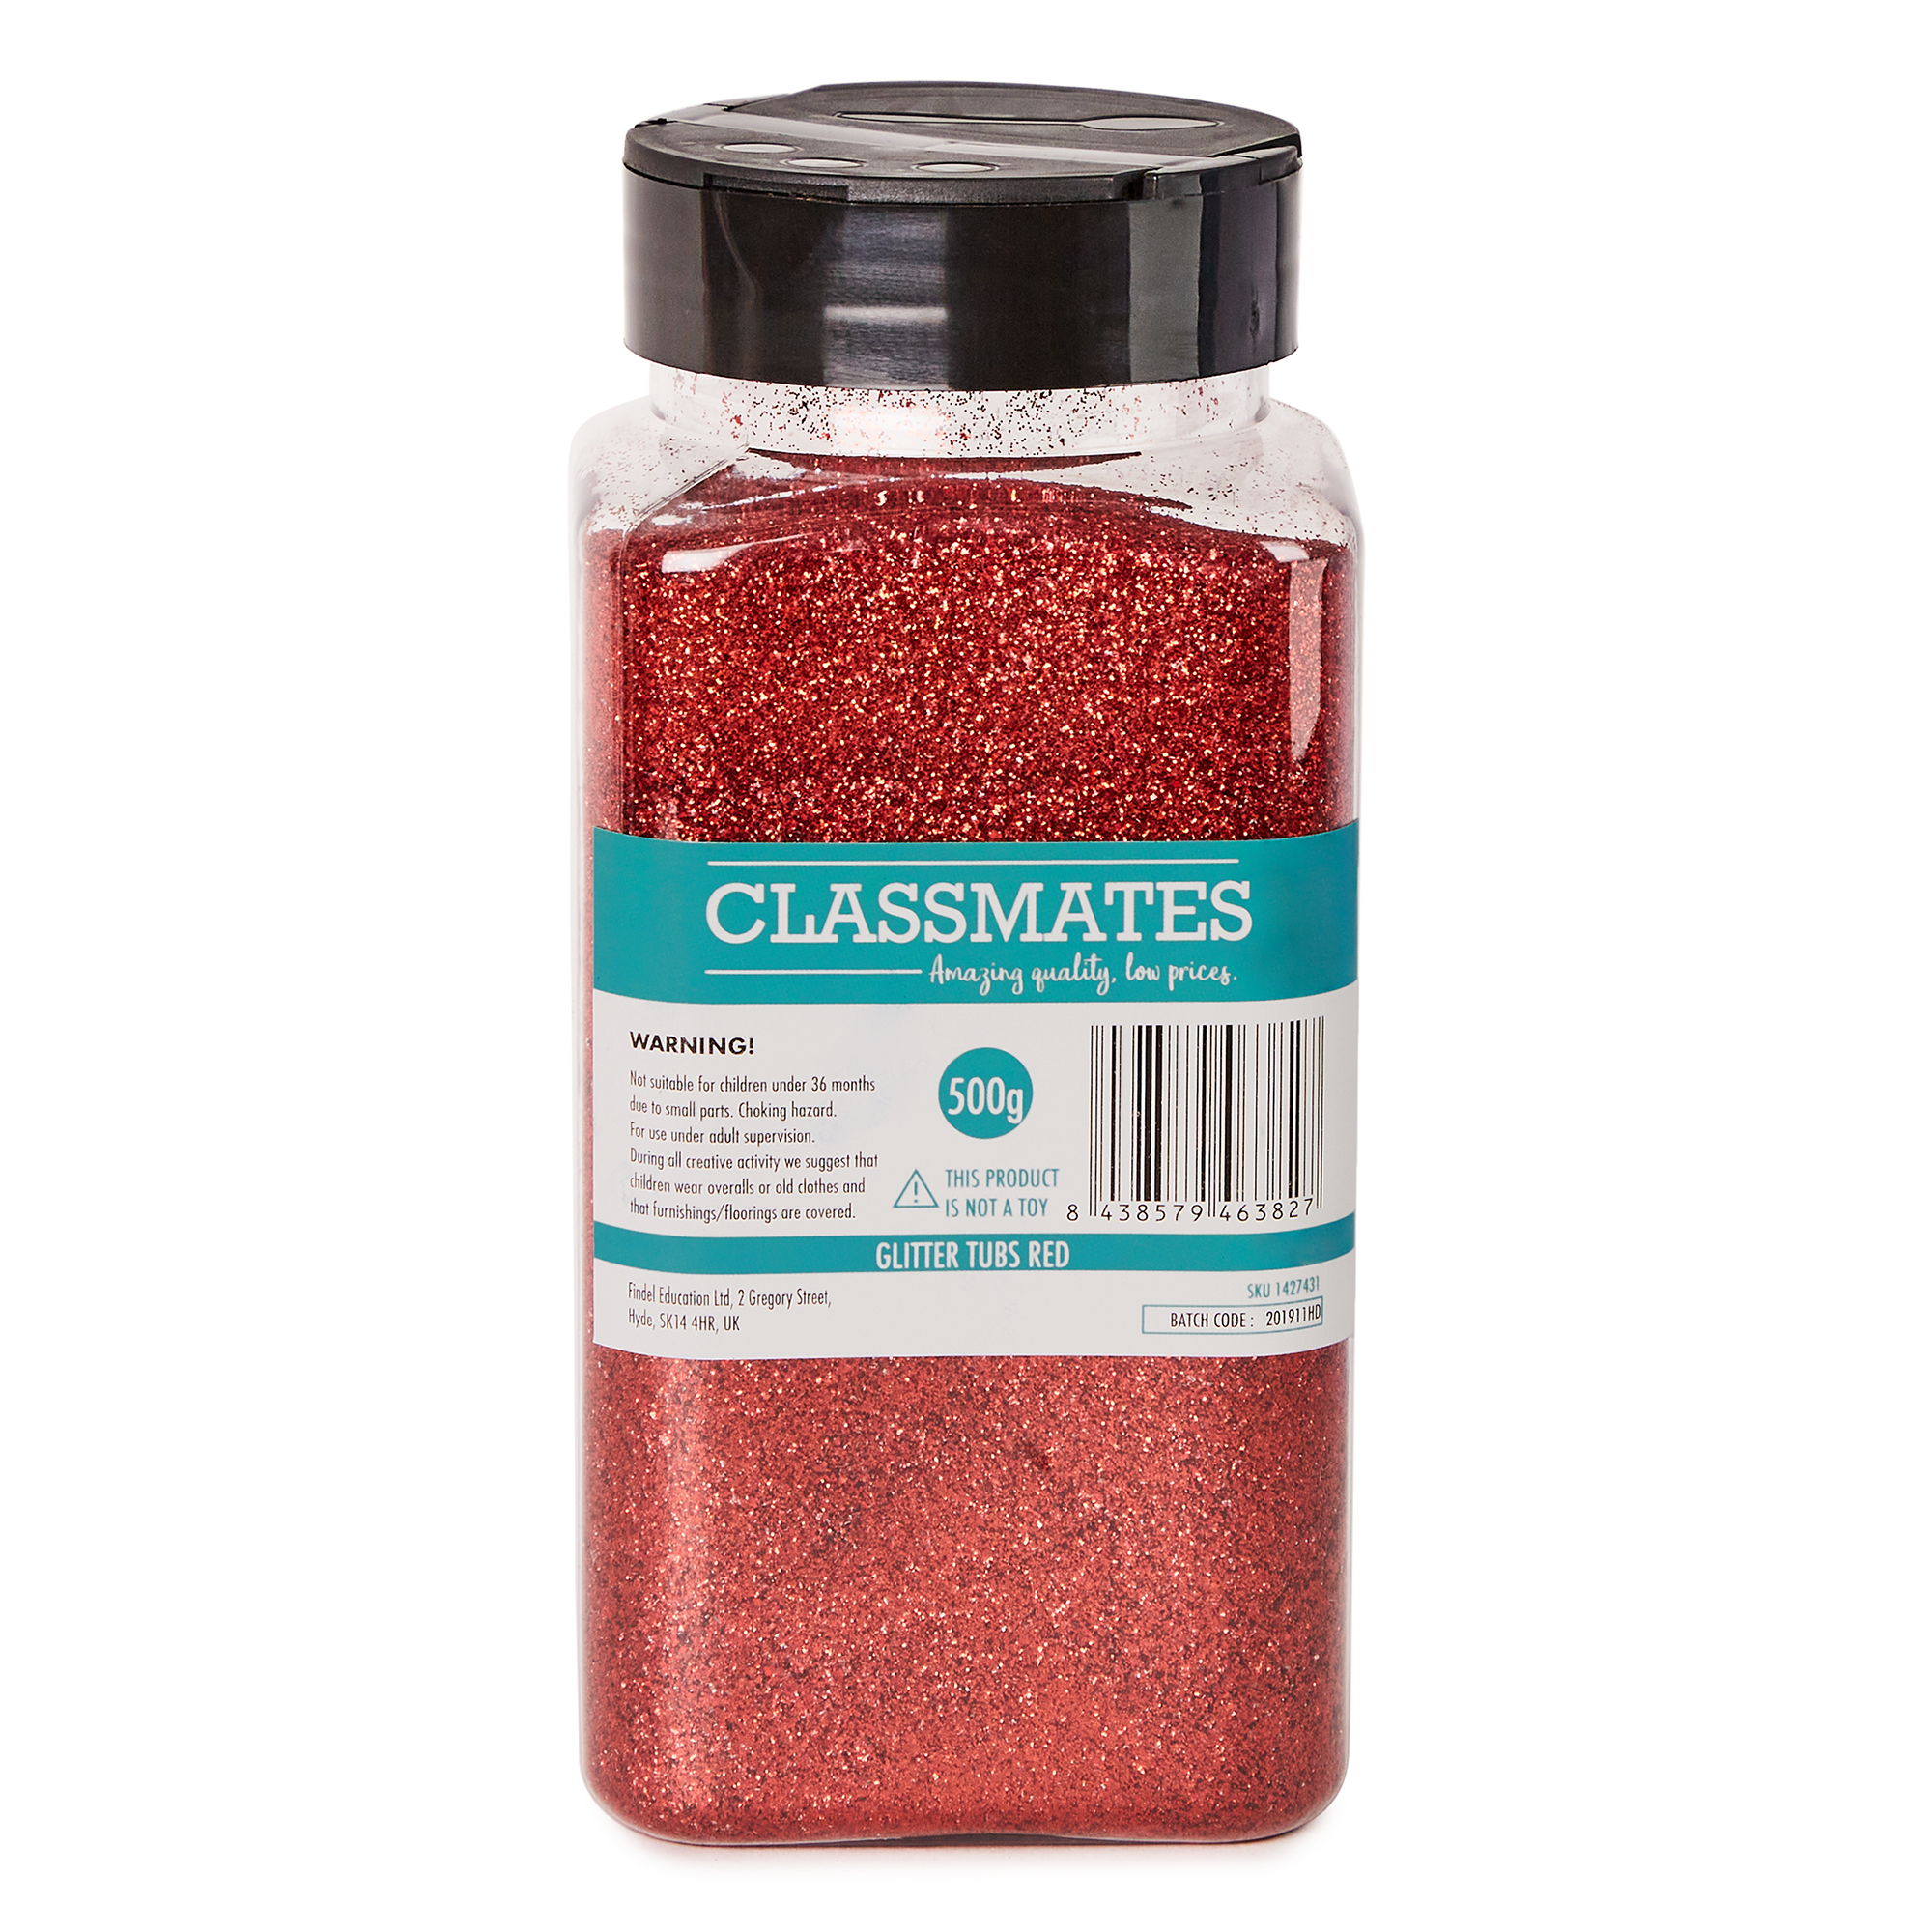 Glitter Tubs Red 500g